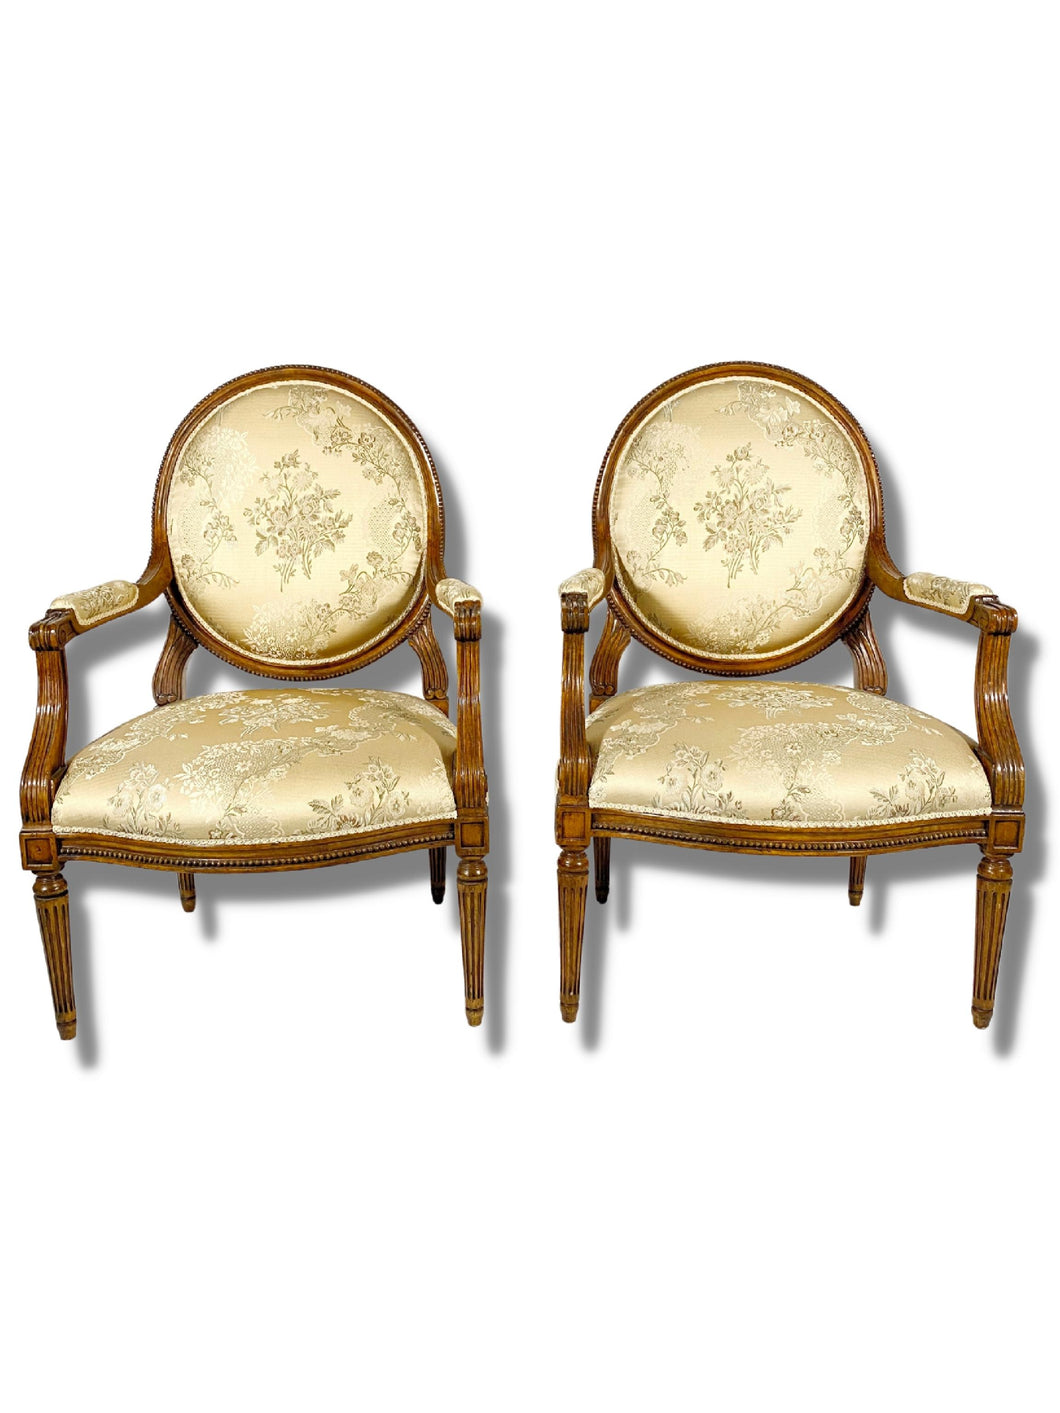 Michael Taylor French Style Fauteuils (Pair)